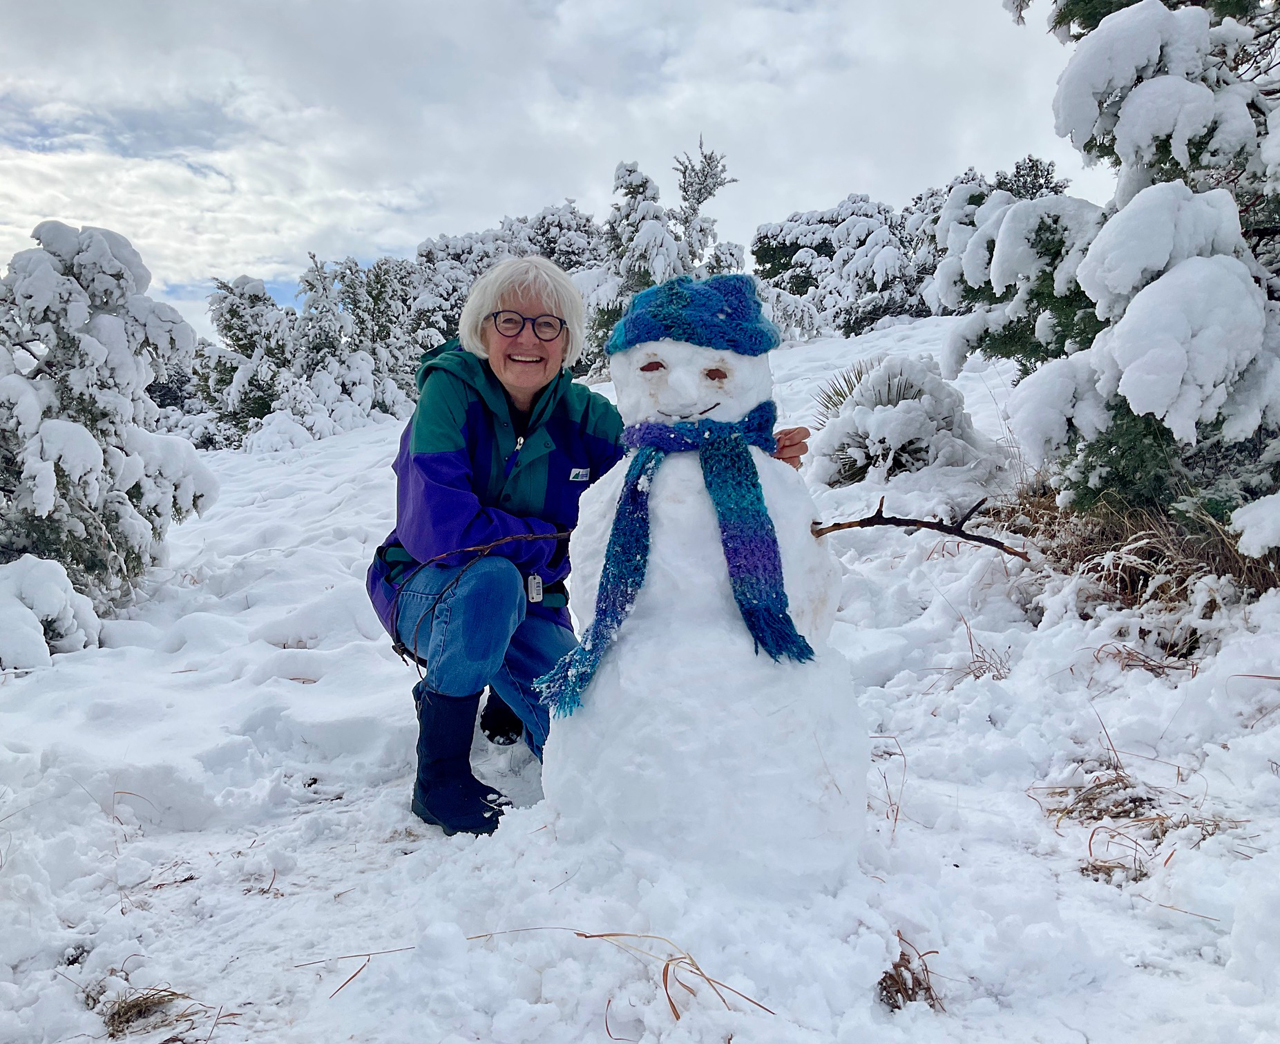 me and my snowperson